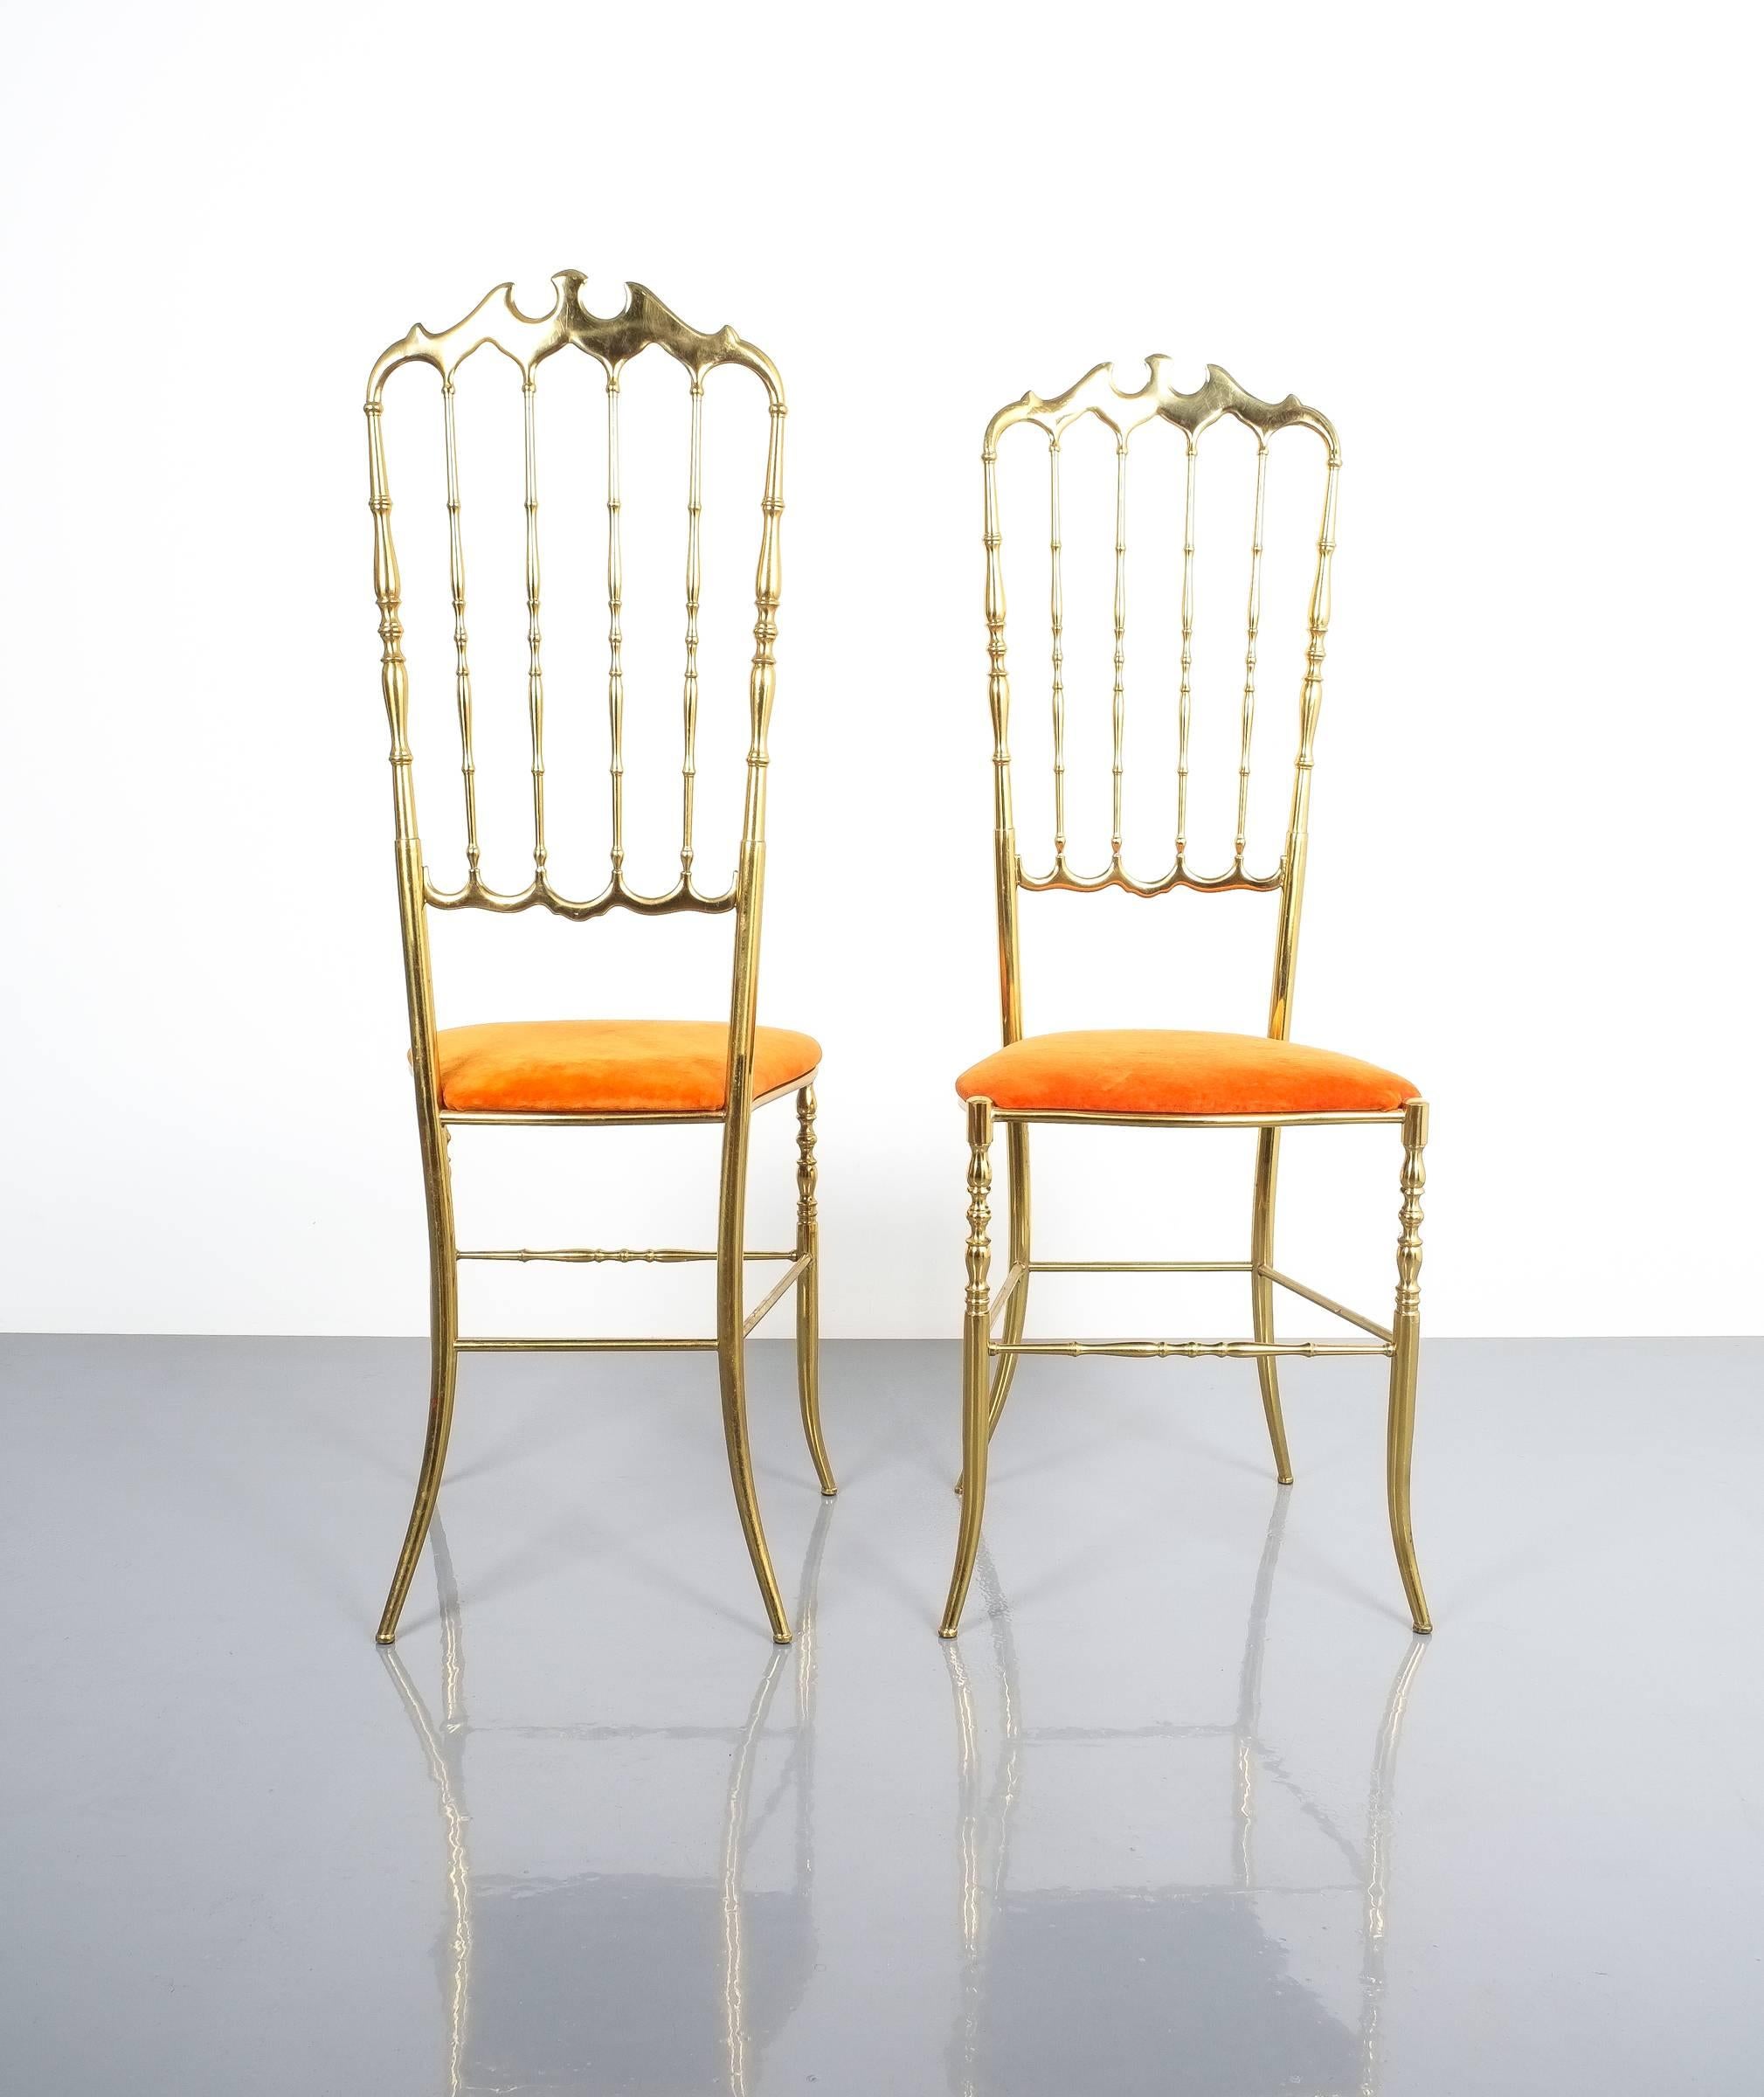 Italian Pair of Polished High Back Brass Chairs by Chiavari, Italy, 1950